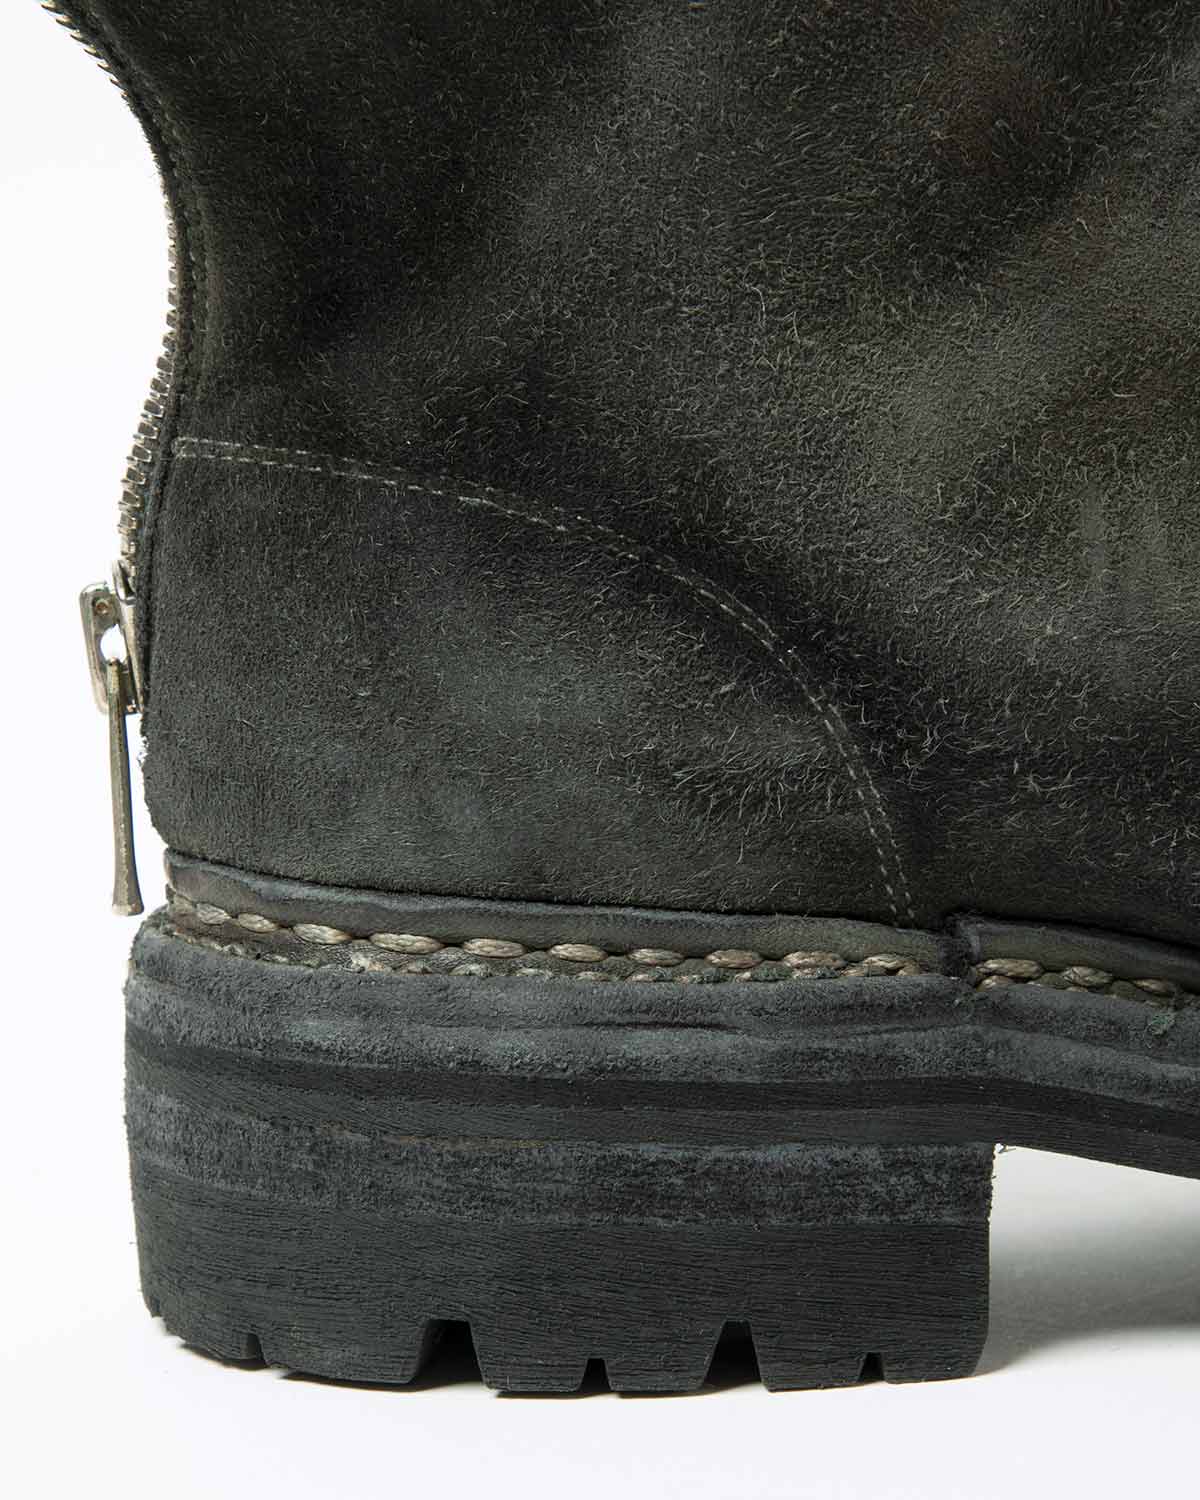 BACK ZIP MIDDLE BOOTS HORSE LEATHER by GUIDI